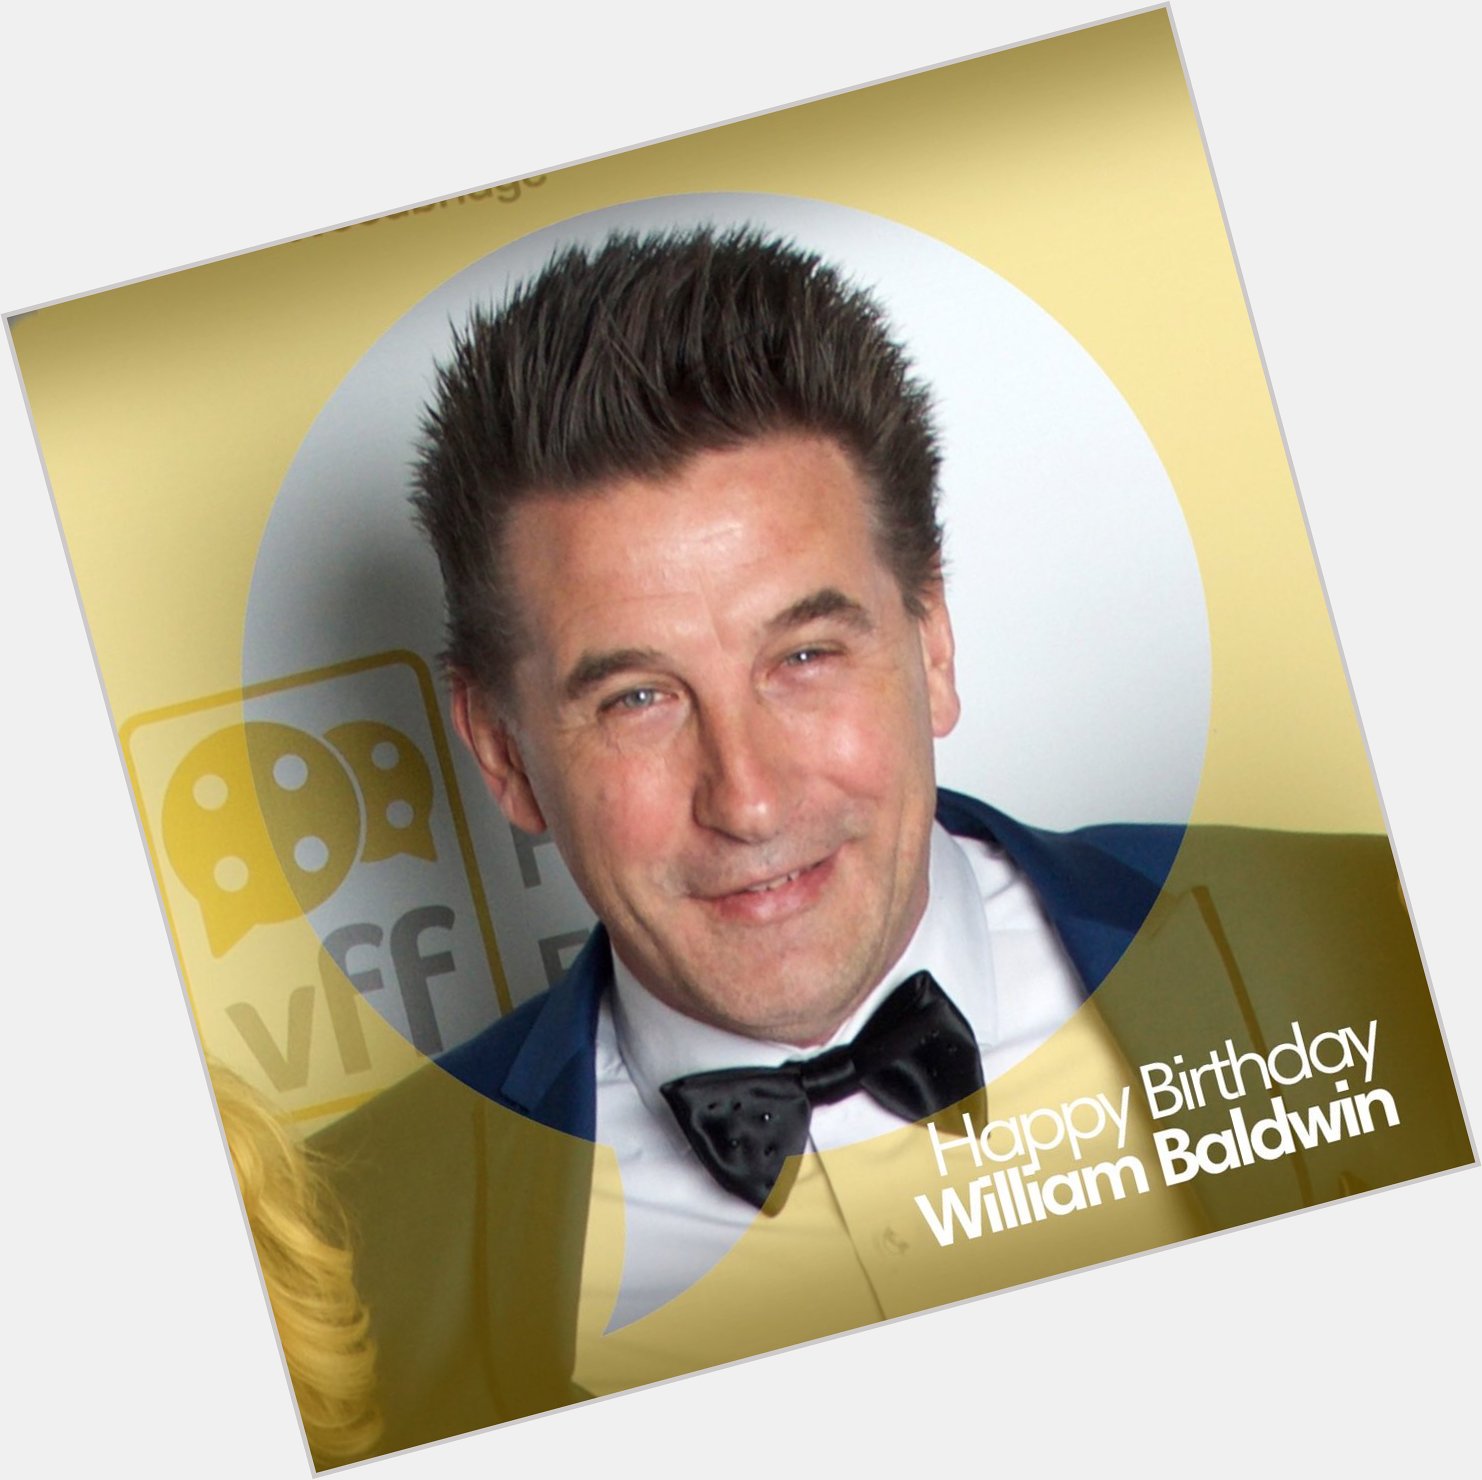 Happy Birthday to our 2016 Indie Leader, William Baldwin!  